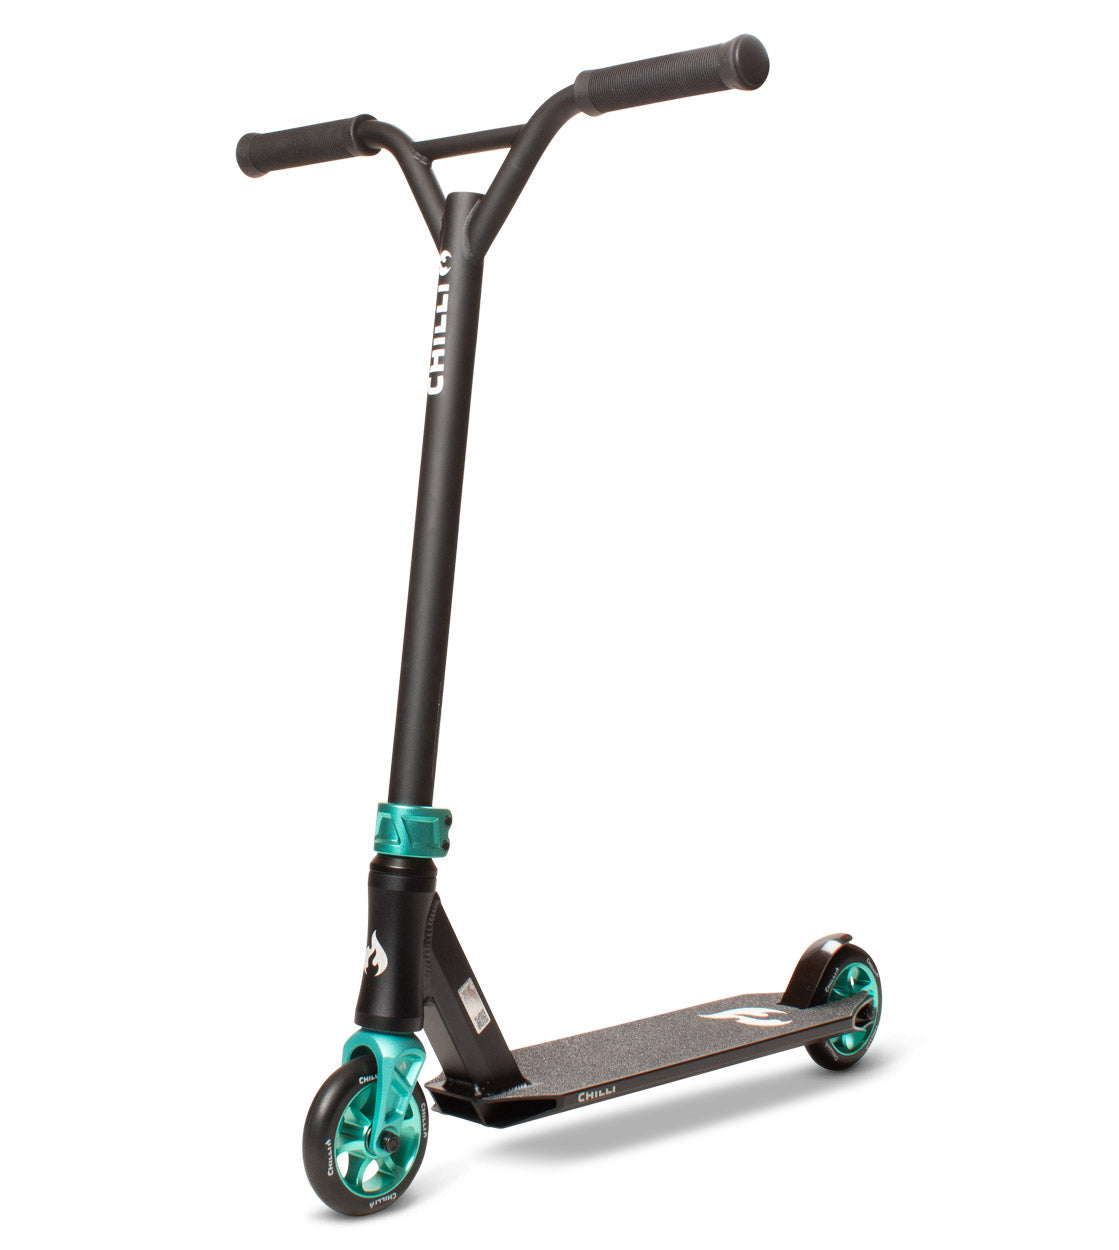 Chilli Scooter 4000